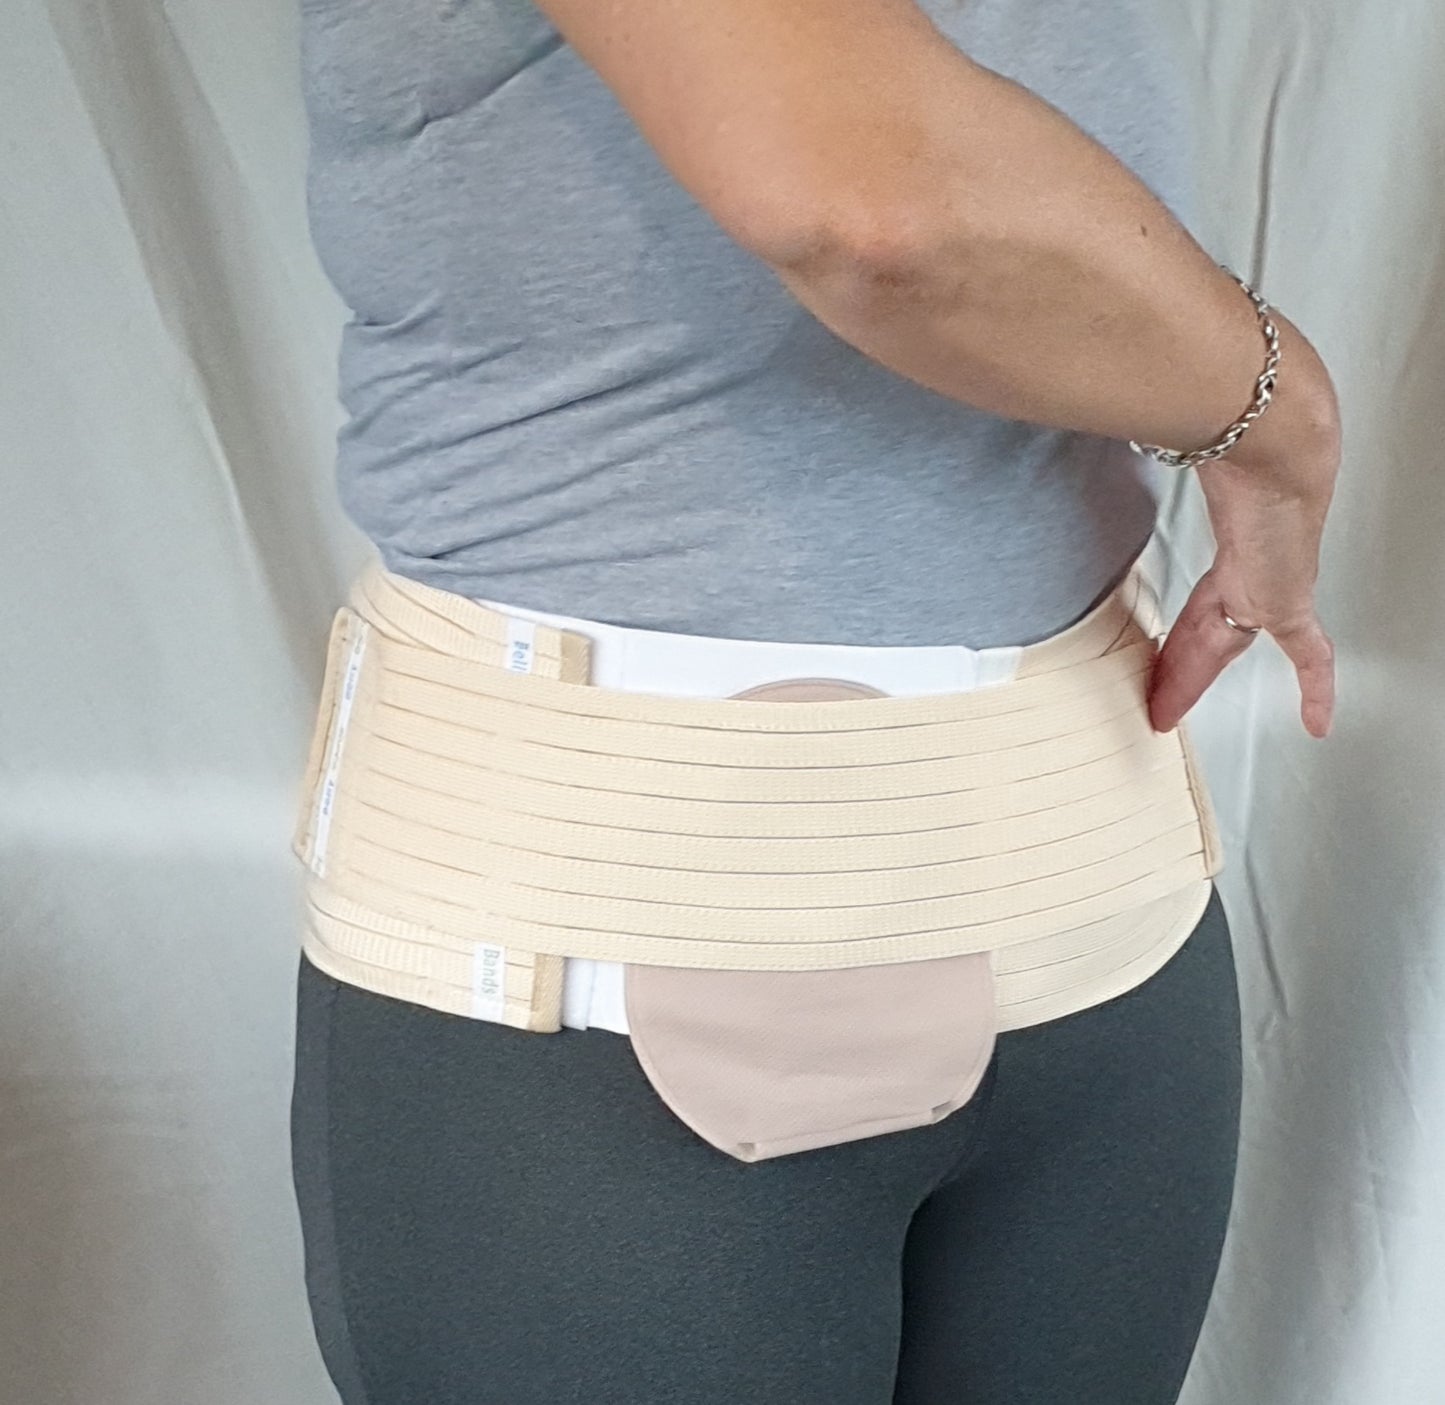 Person wearing an stoma belt with hole